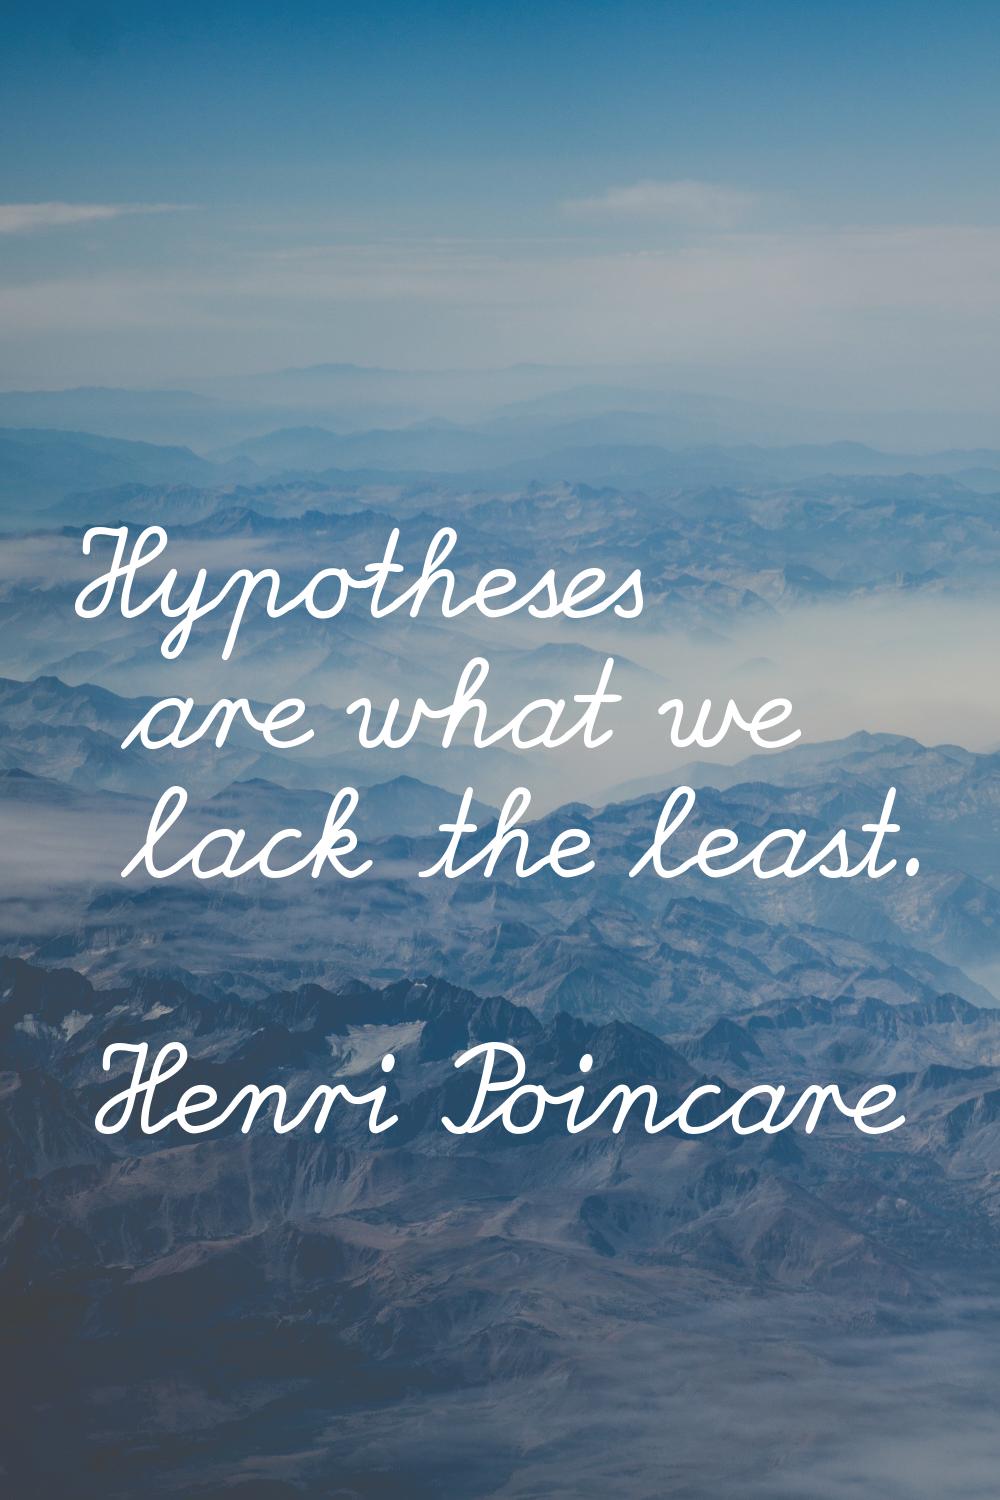 Hypotheses are what we lack the least.